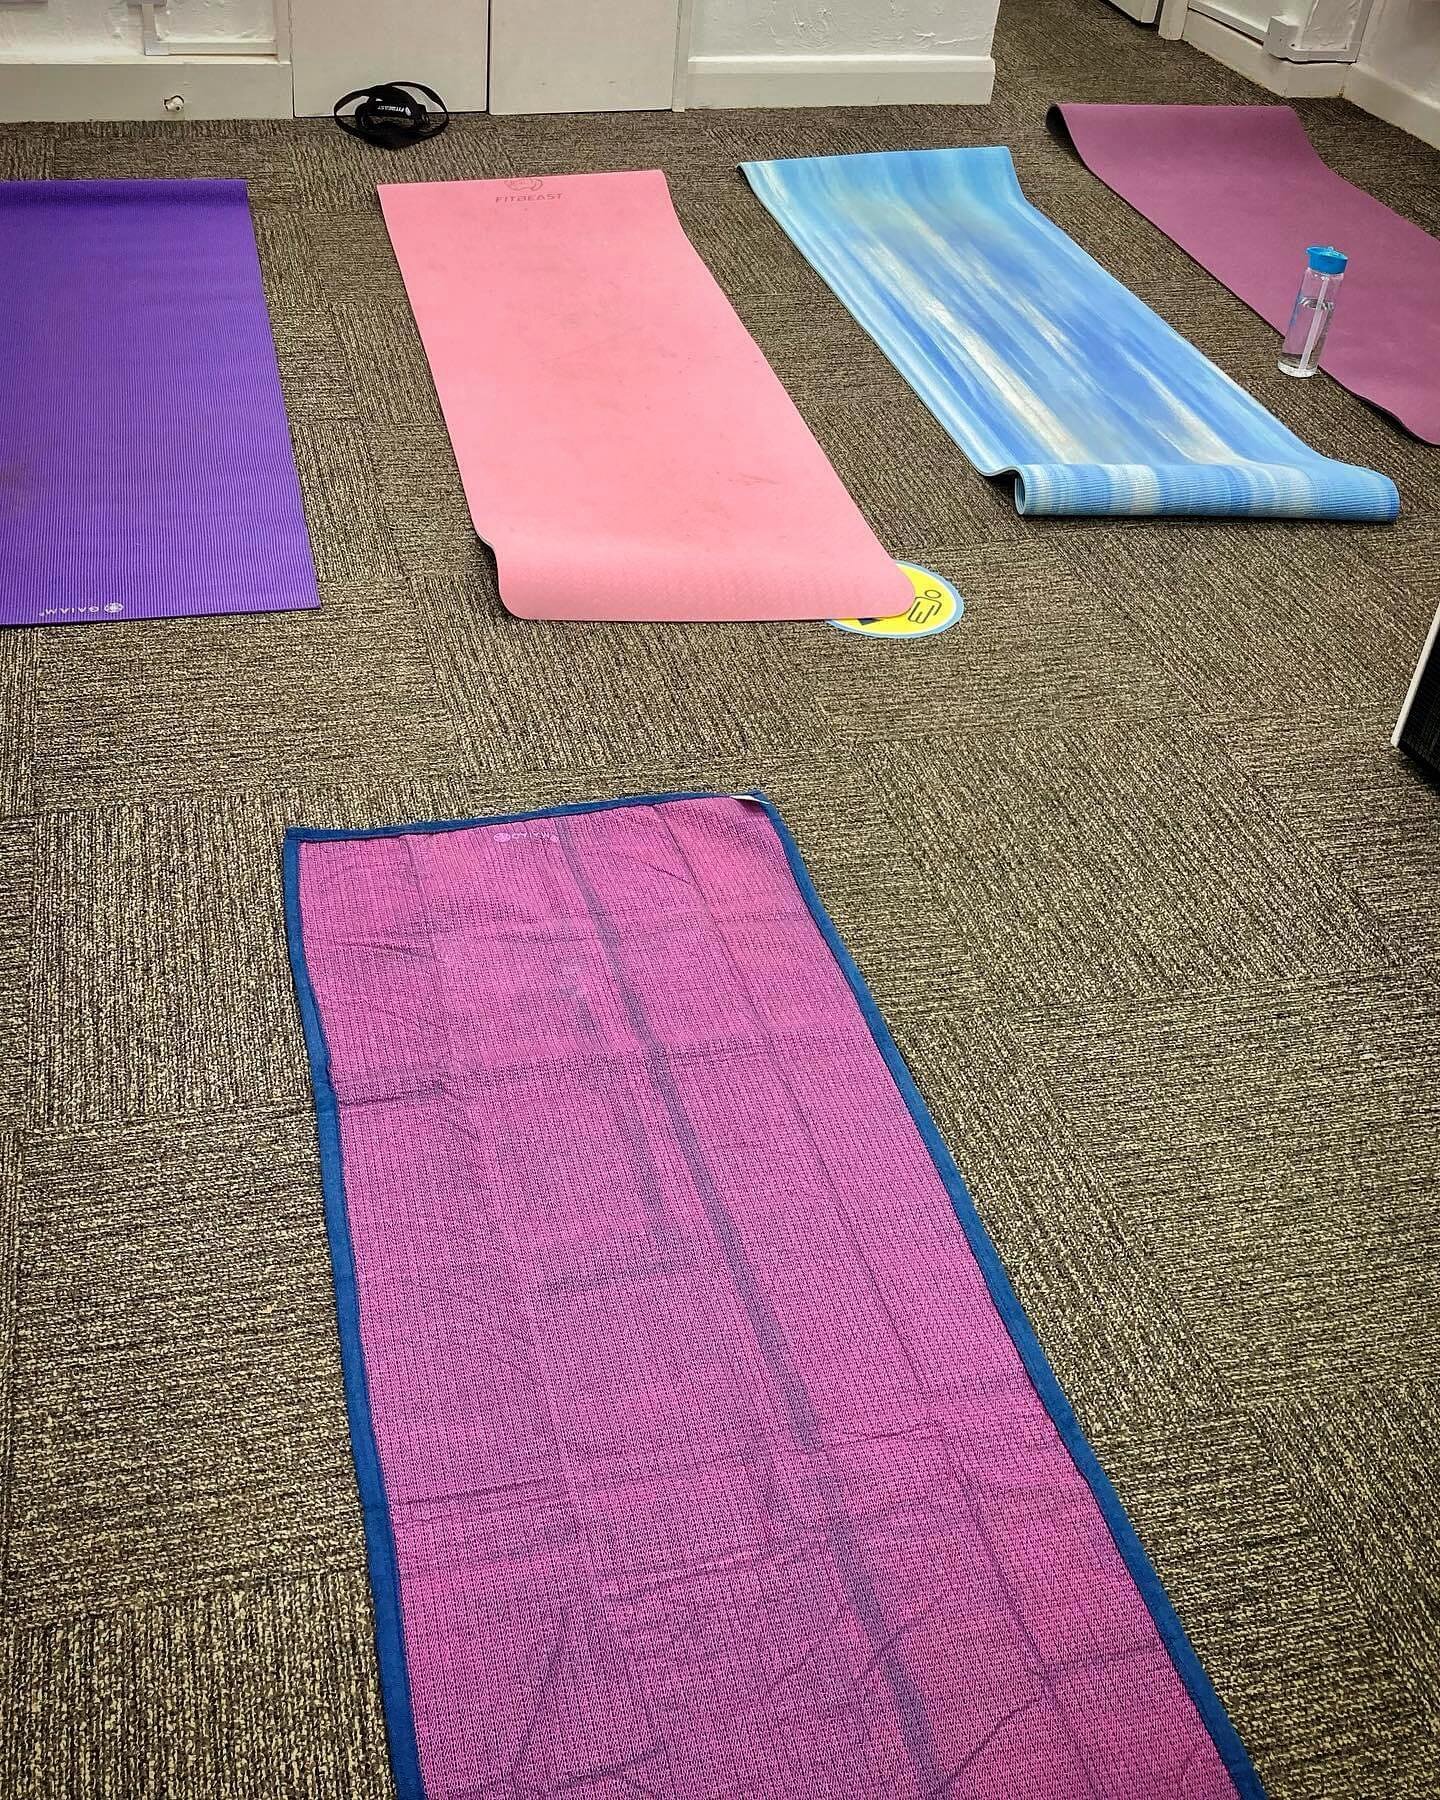 Lunchtime #mindfulness team yoga 🧘&zwj;♀️today. There may be a few pink cheeks this afternoon here @eastaytondental 😂 

#yoga #teamyoga #corestrength #denplan @denplan #notjustteeth